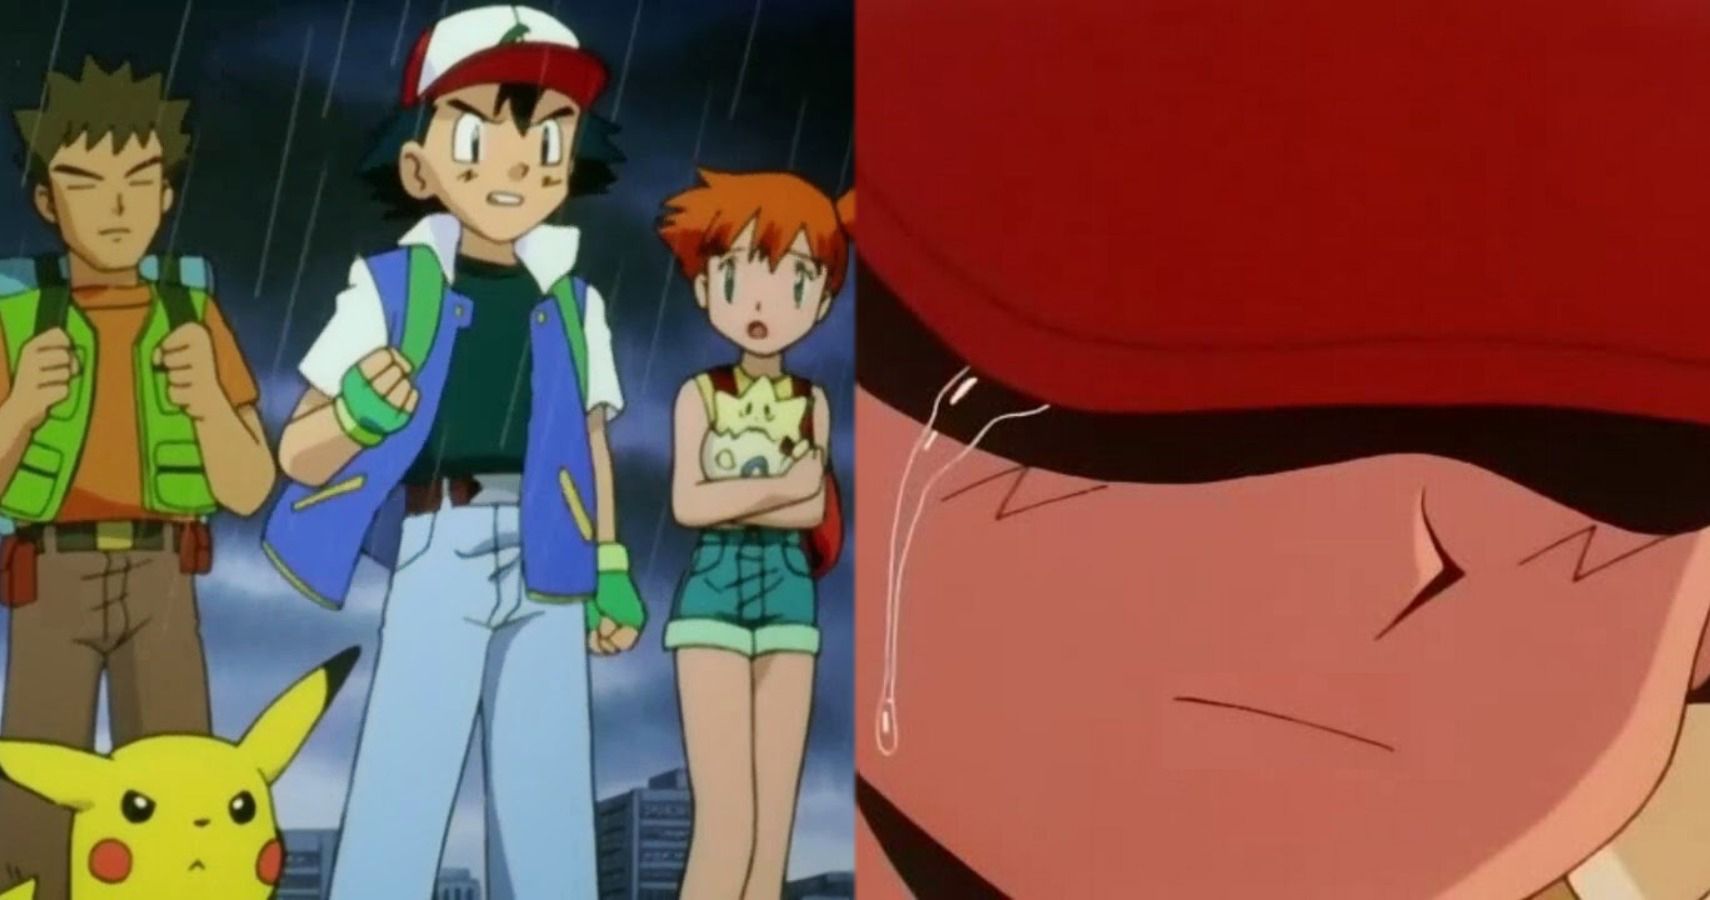 The Original Ending For The Pokémon Anime Was Incredibly Depressing -  